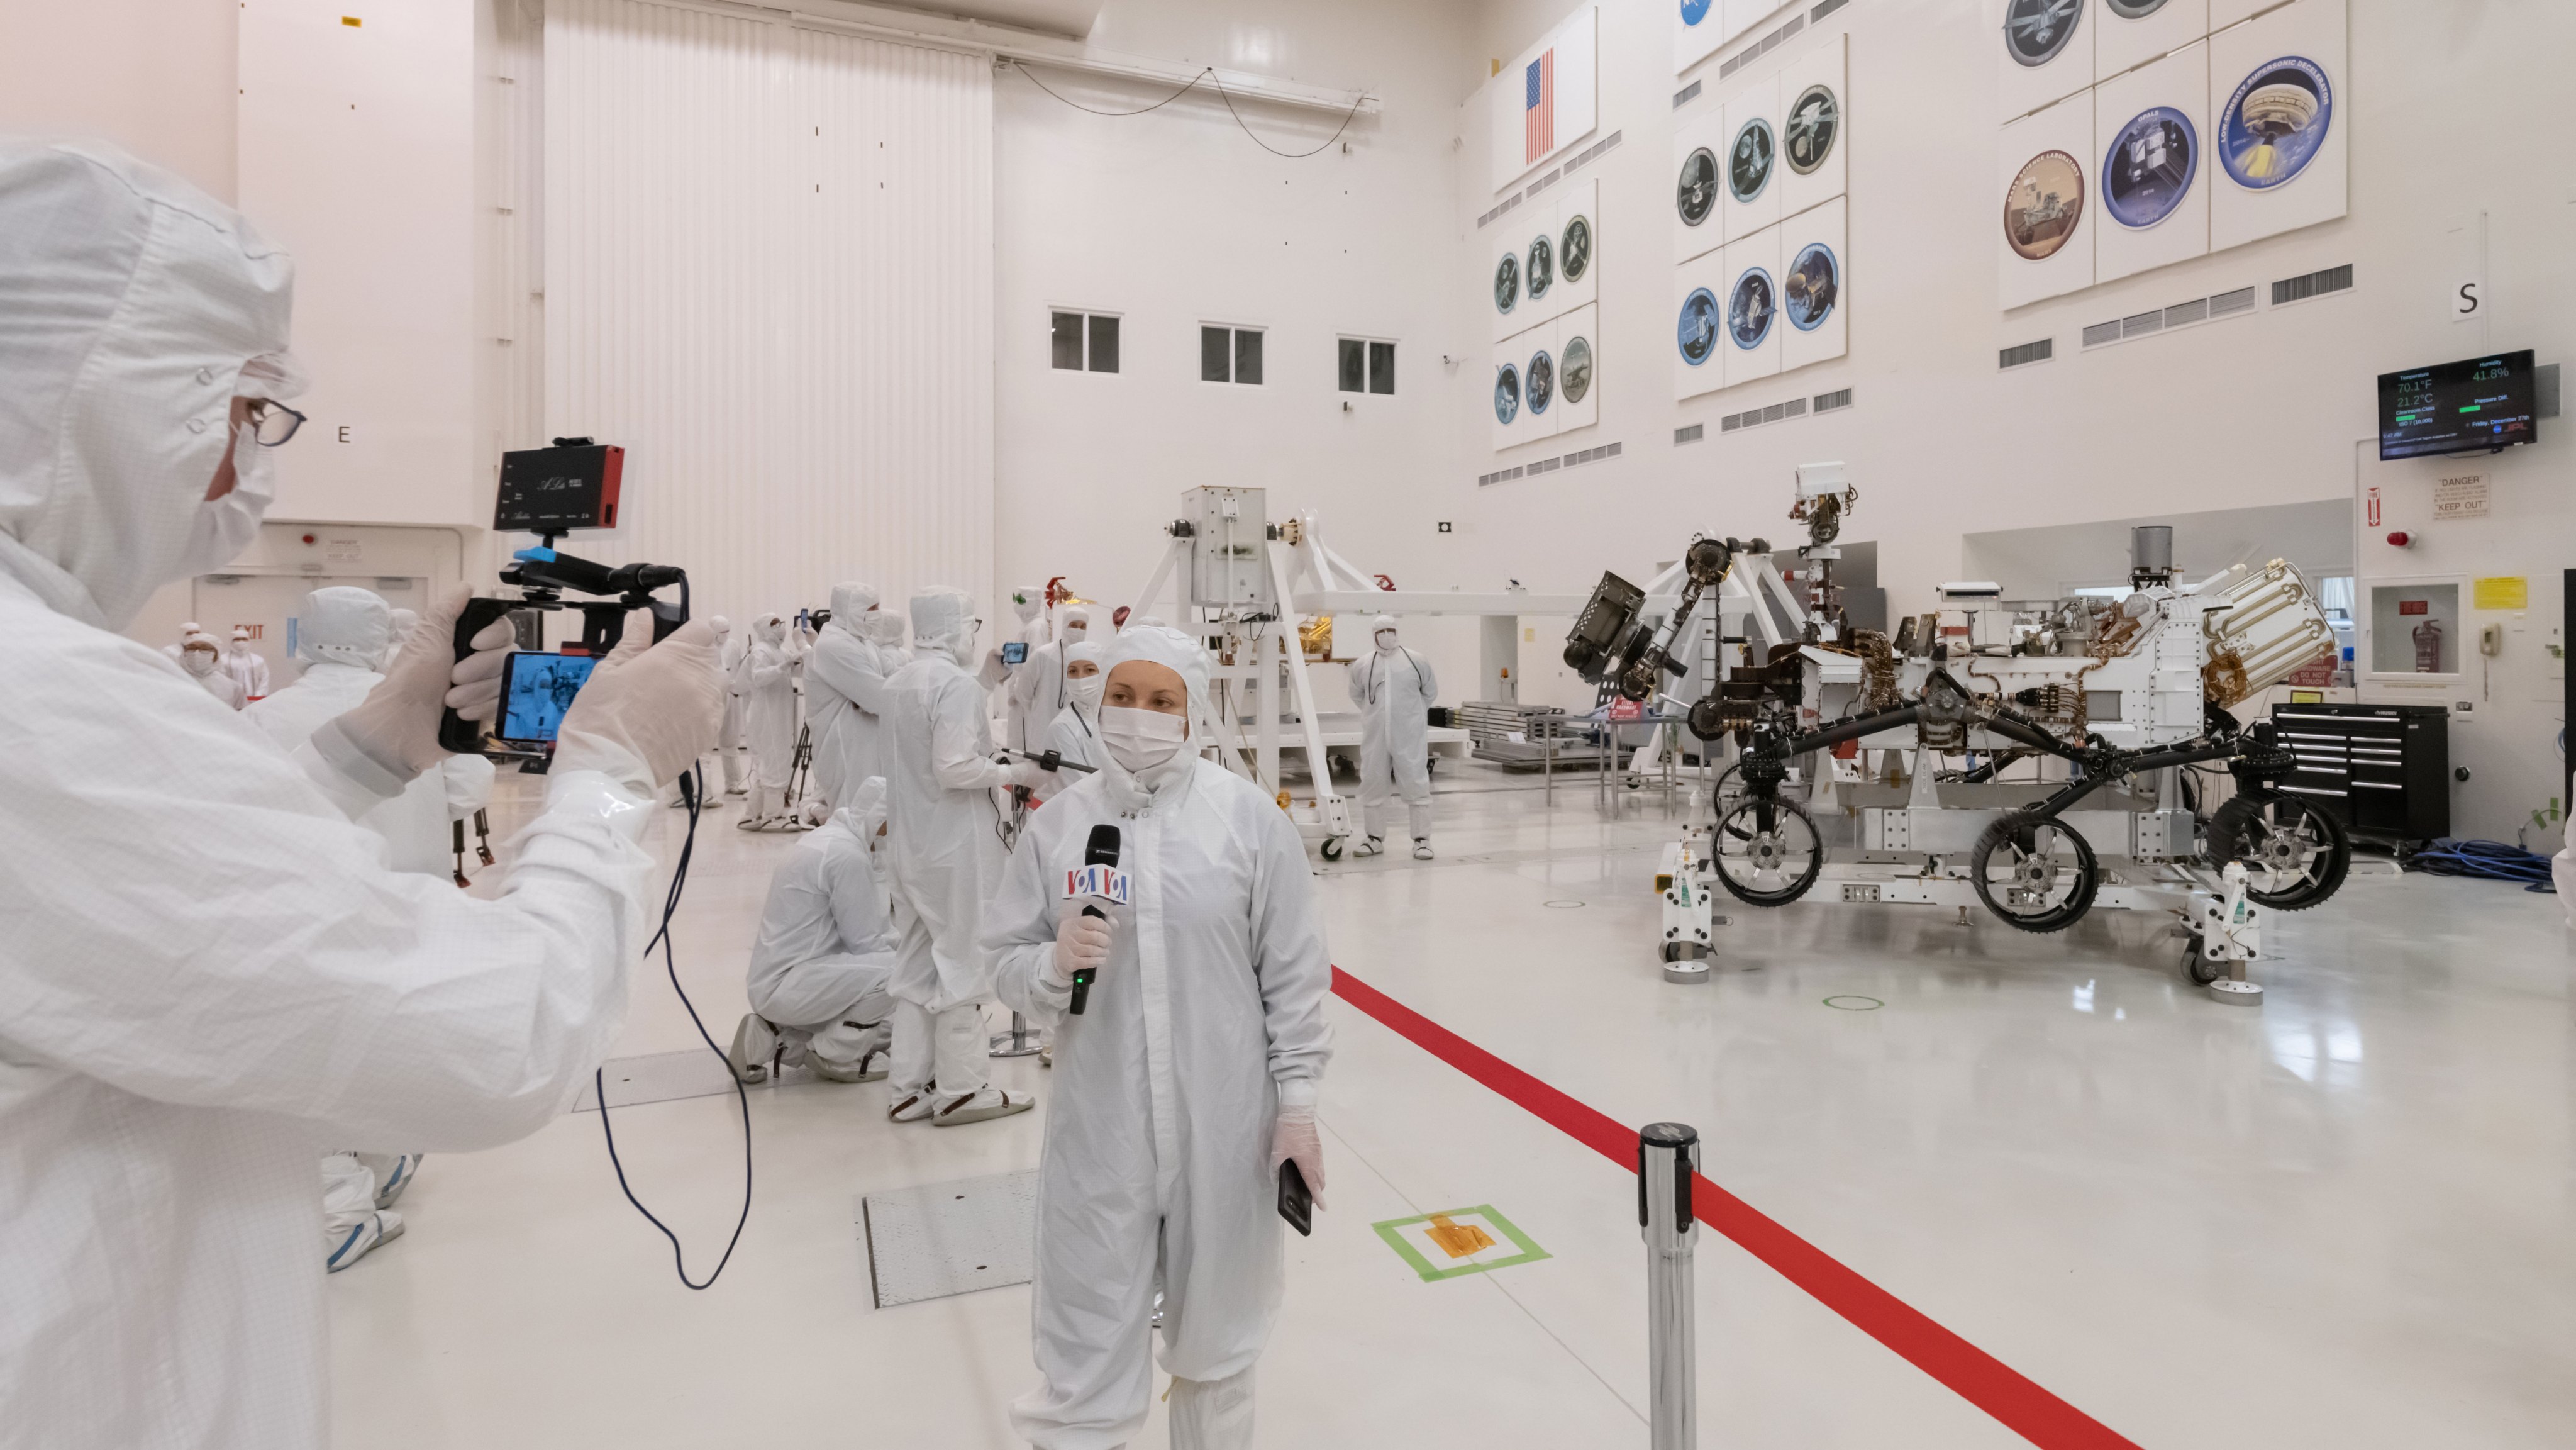 During their only opportunity to see NASA's next Mars rover from inside JPL's clean room prior to its shipment to Cape Canaveral, members of the media interview the builders of the Mars 2020 mission.